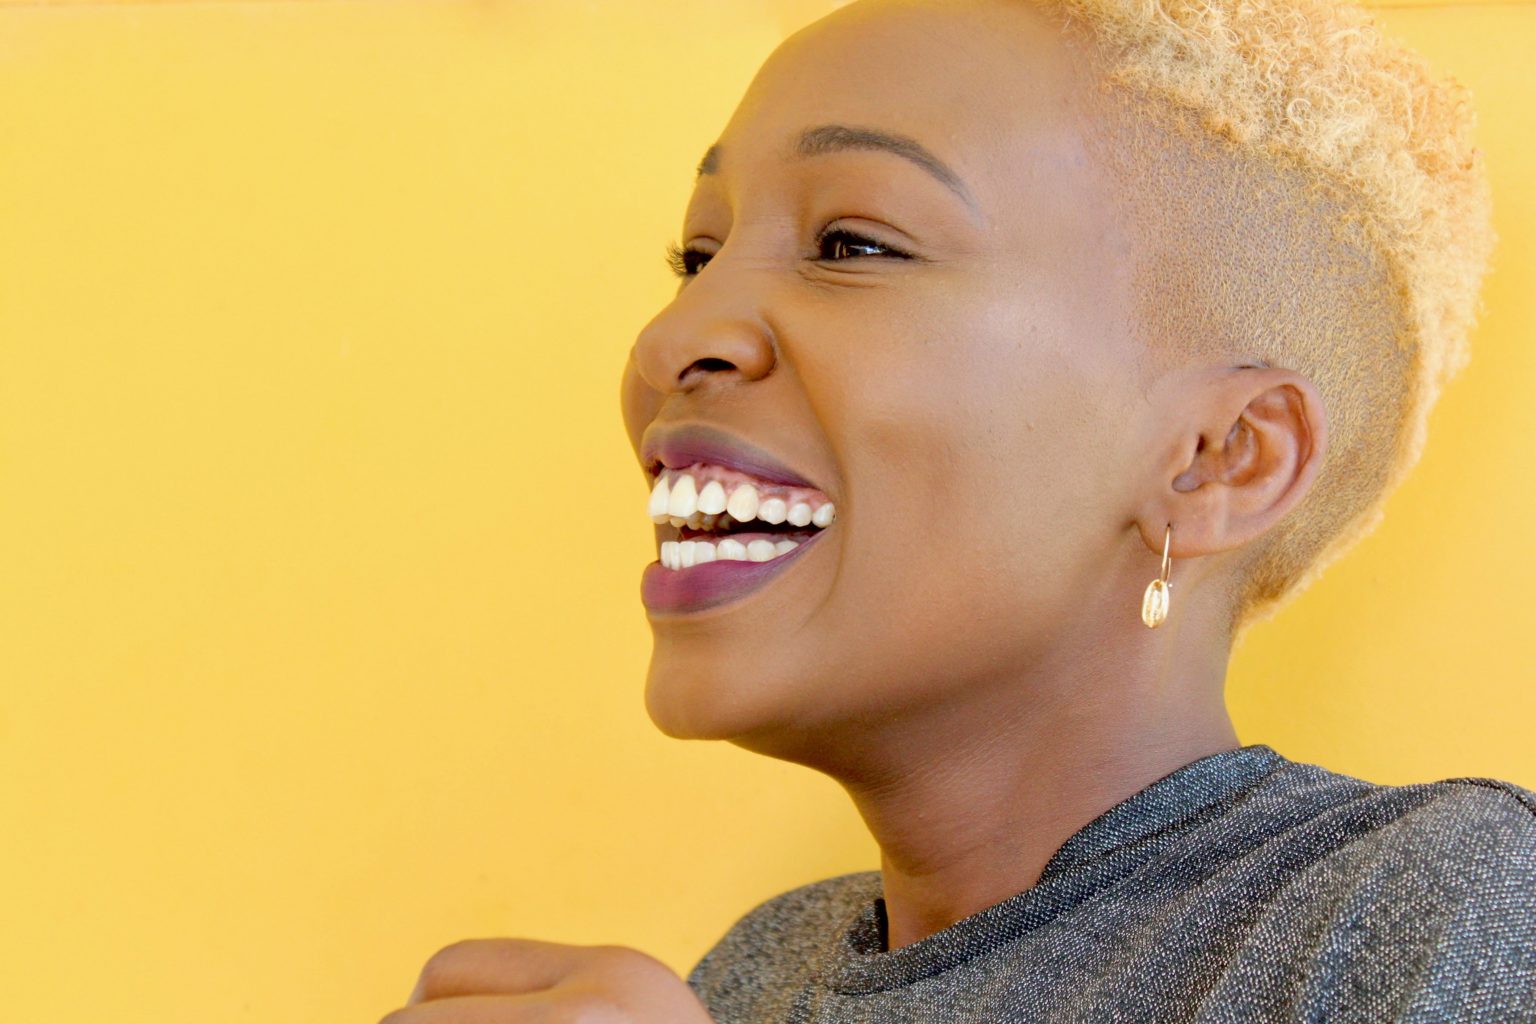 A black woman with short hair and a gummy smile on a bright yellow background